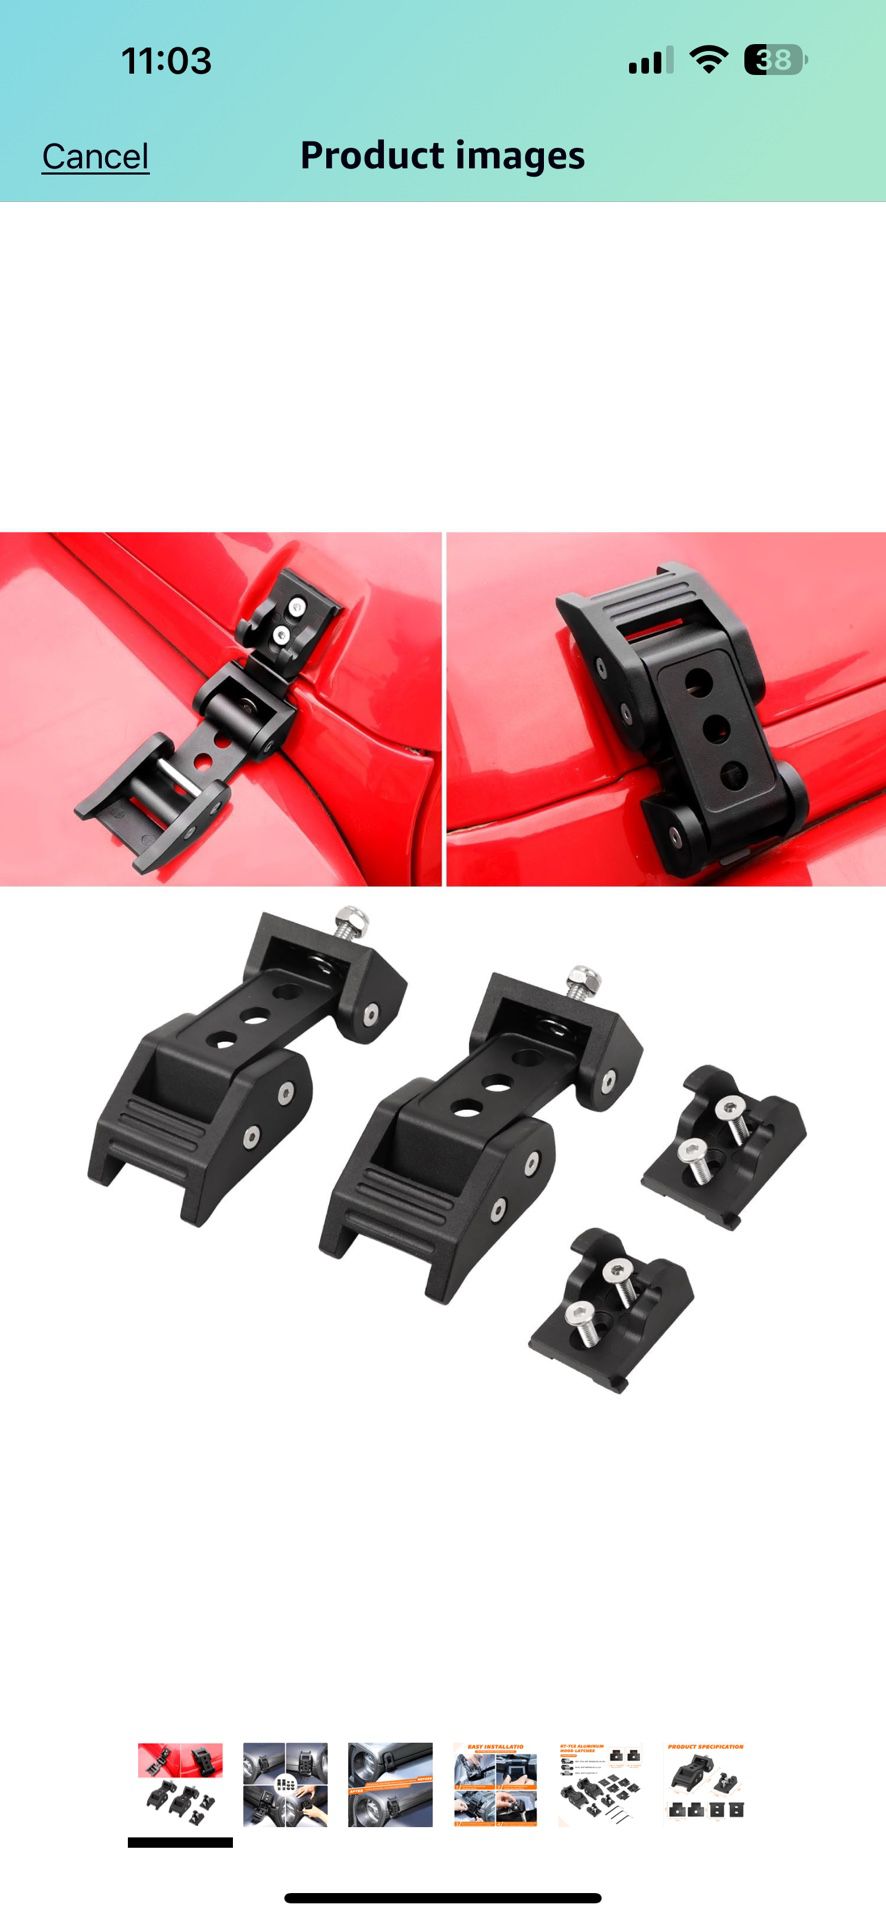 Hood Latch Lock Catch For Jeep